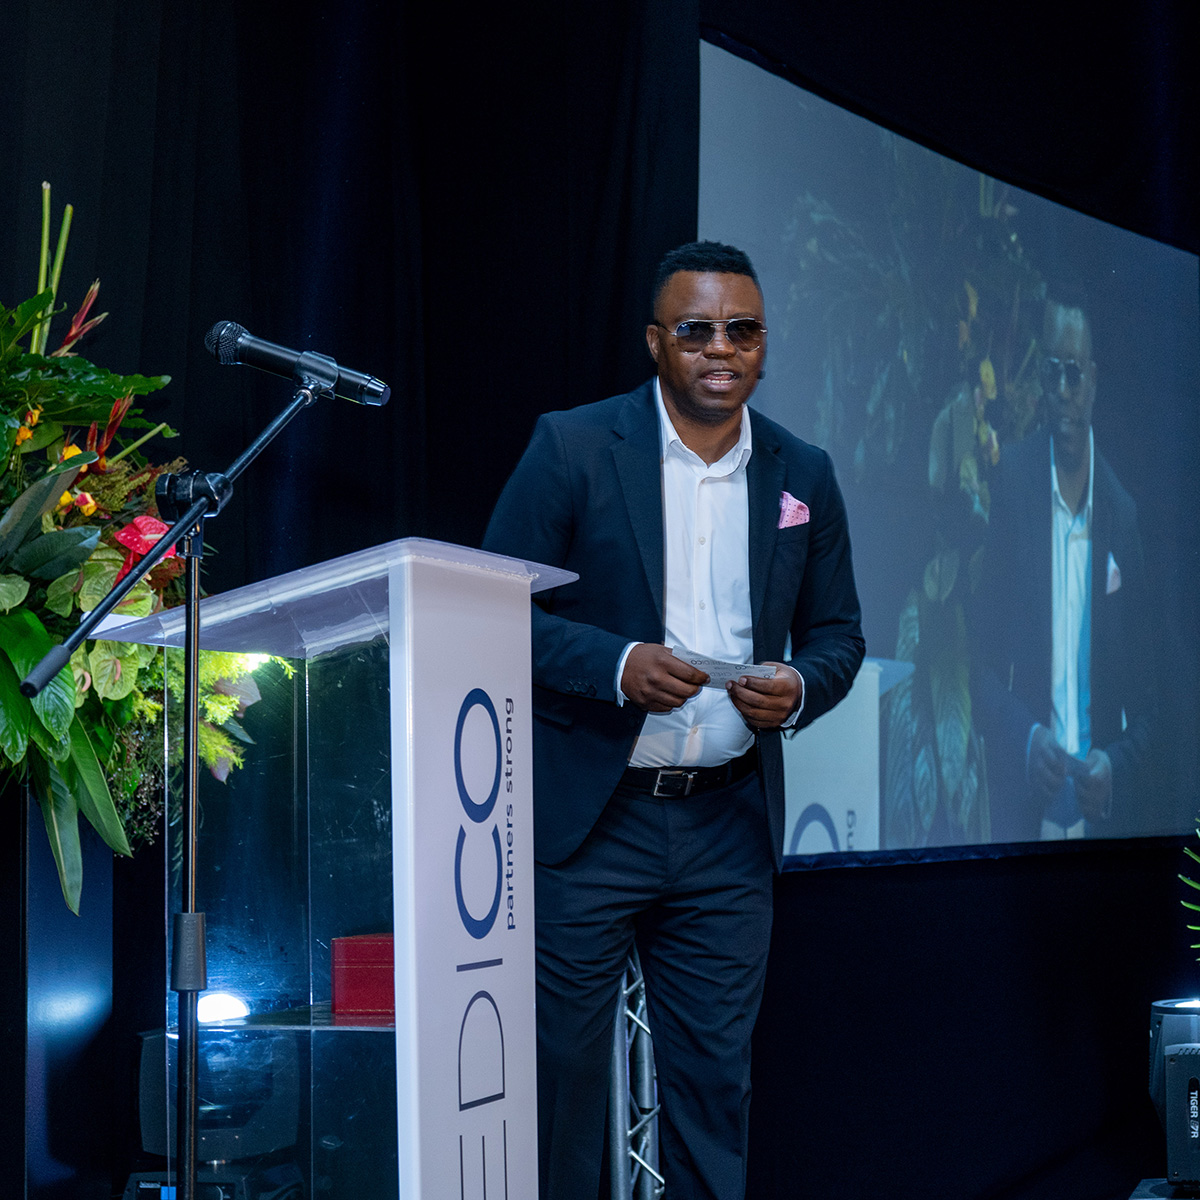 Kevin de Souza, wearing sunglasses on stage, addresses the audience from next to a podium with his image projected on-screen next to him at Credico South Africa's 2023 Awards Gala at Sun City Resort